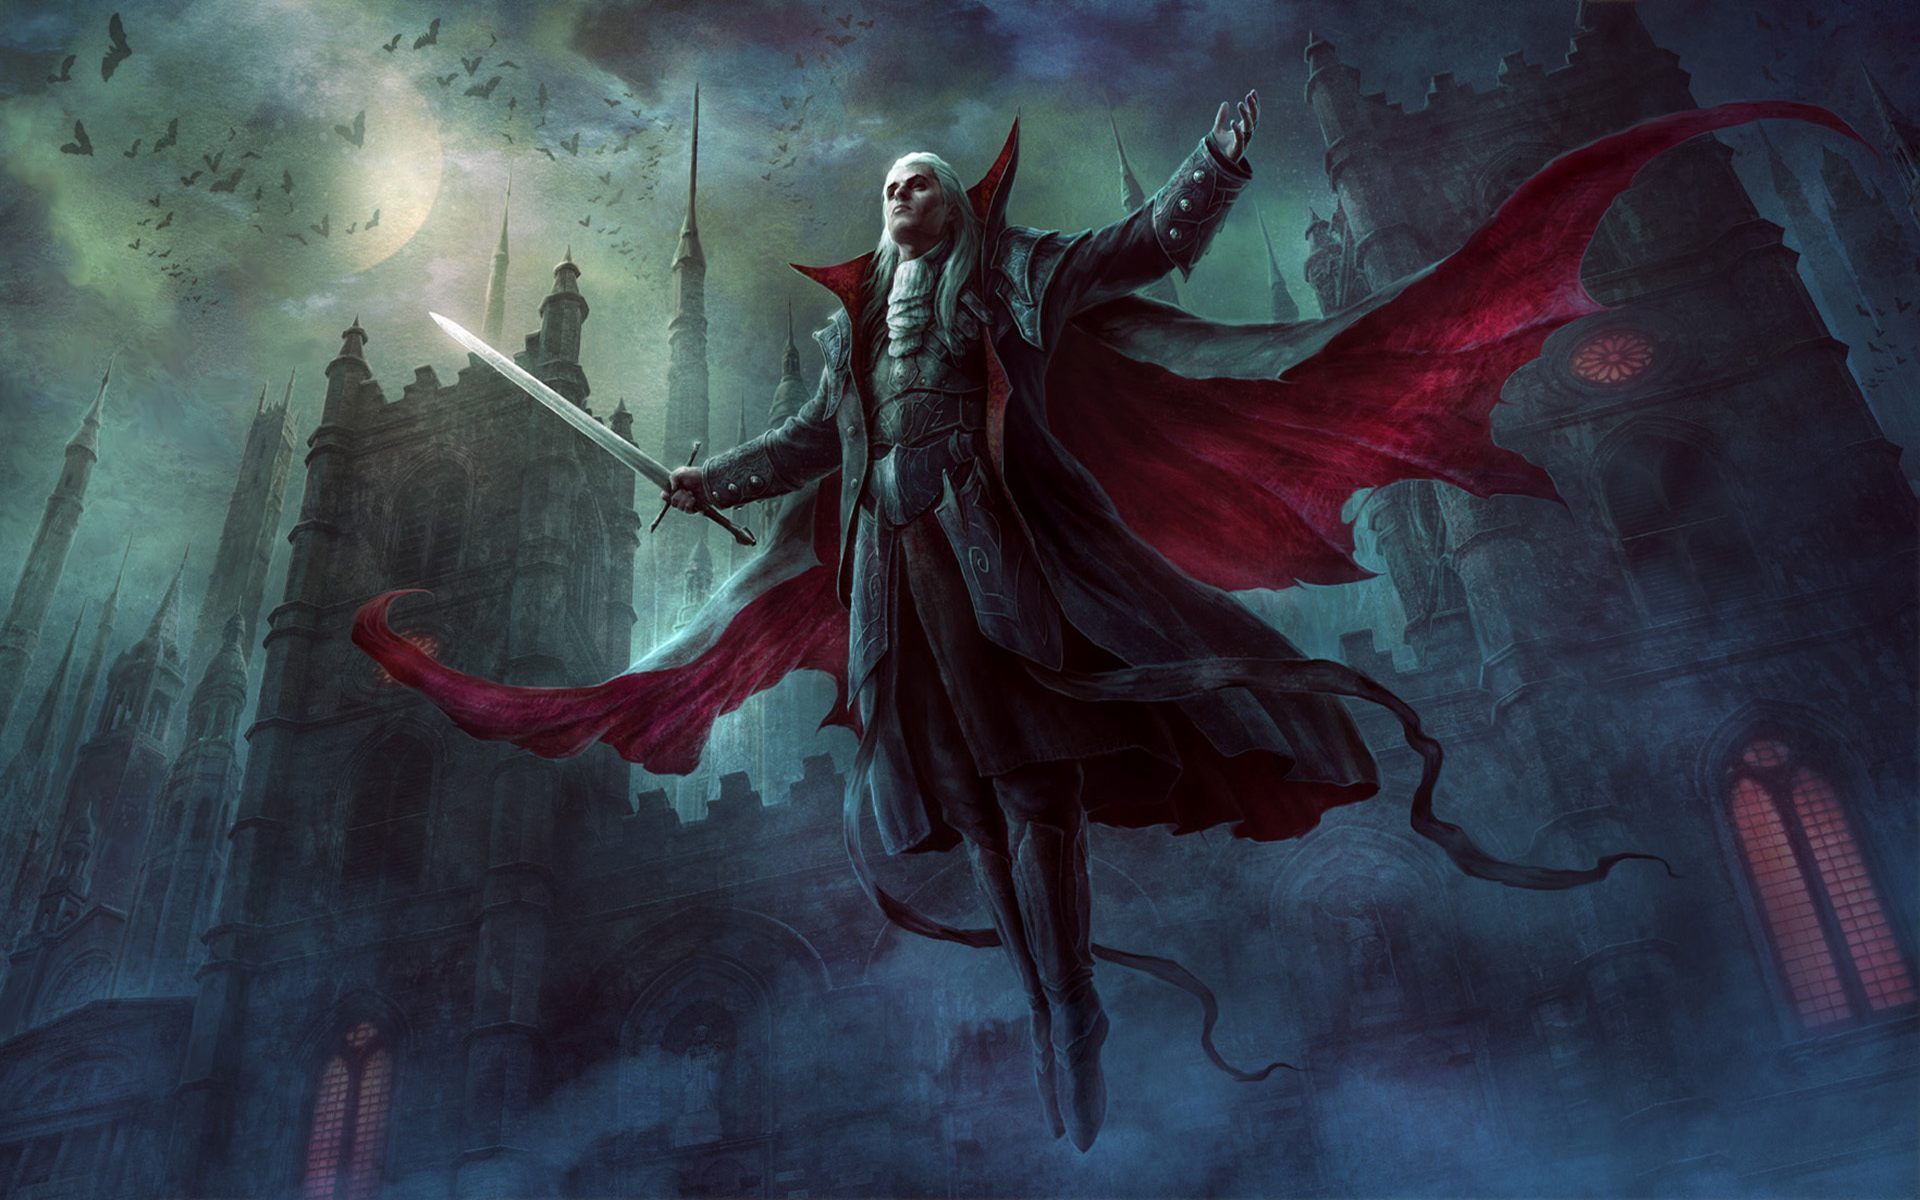 Dracula, the legendary vampire, is depicted in this image. He is depicted with a red cape and a sword in his hand. He is flying over a dark castle. - Vampire